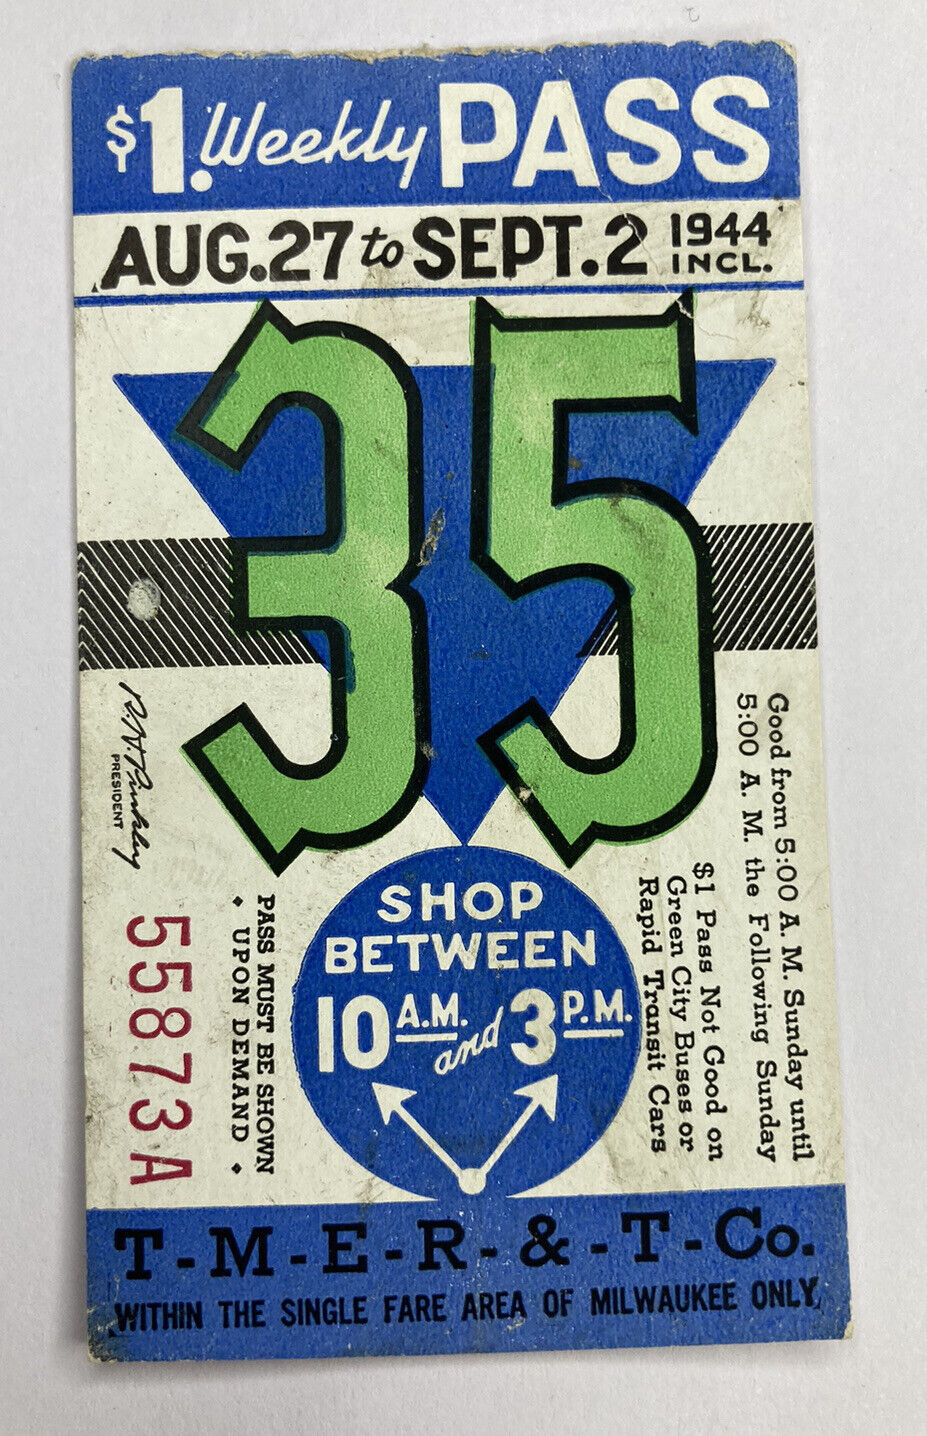 VTG 1944 Weekly Pass MILWAUKEE WISCONSIN Public Transit Shopping Times TMER&TCo